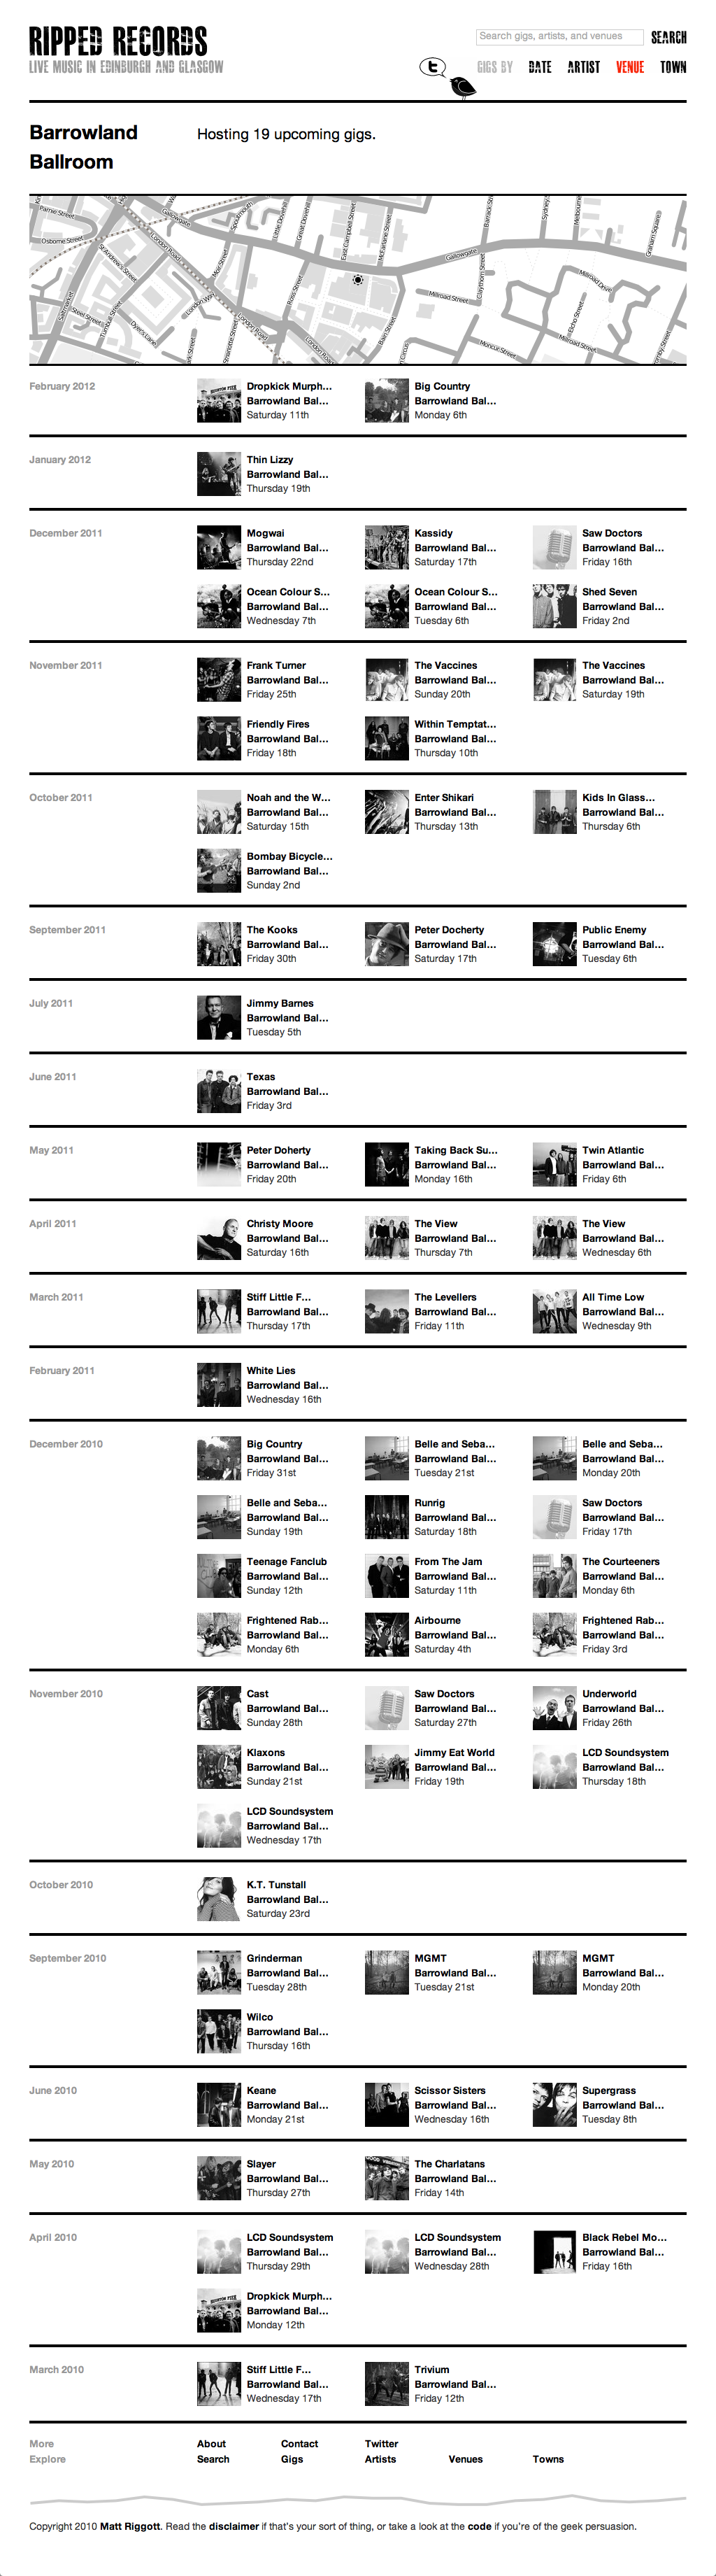 Full-size screenshot of the venue page for the Barras